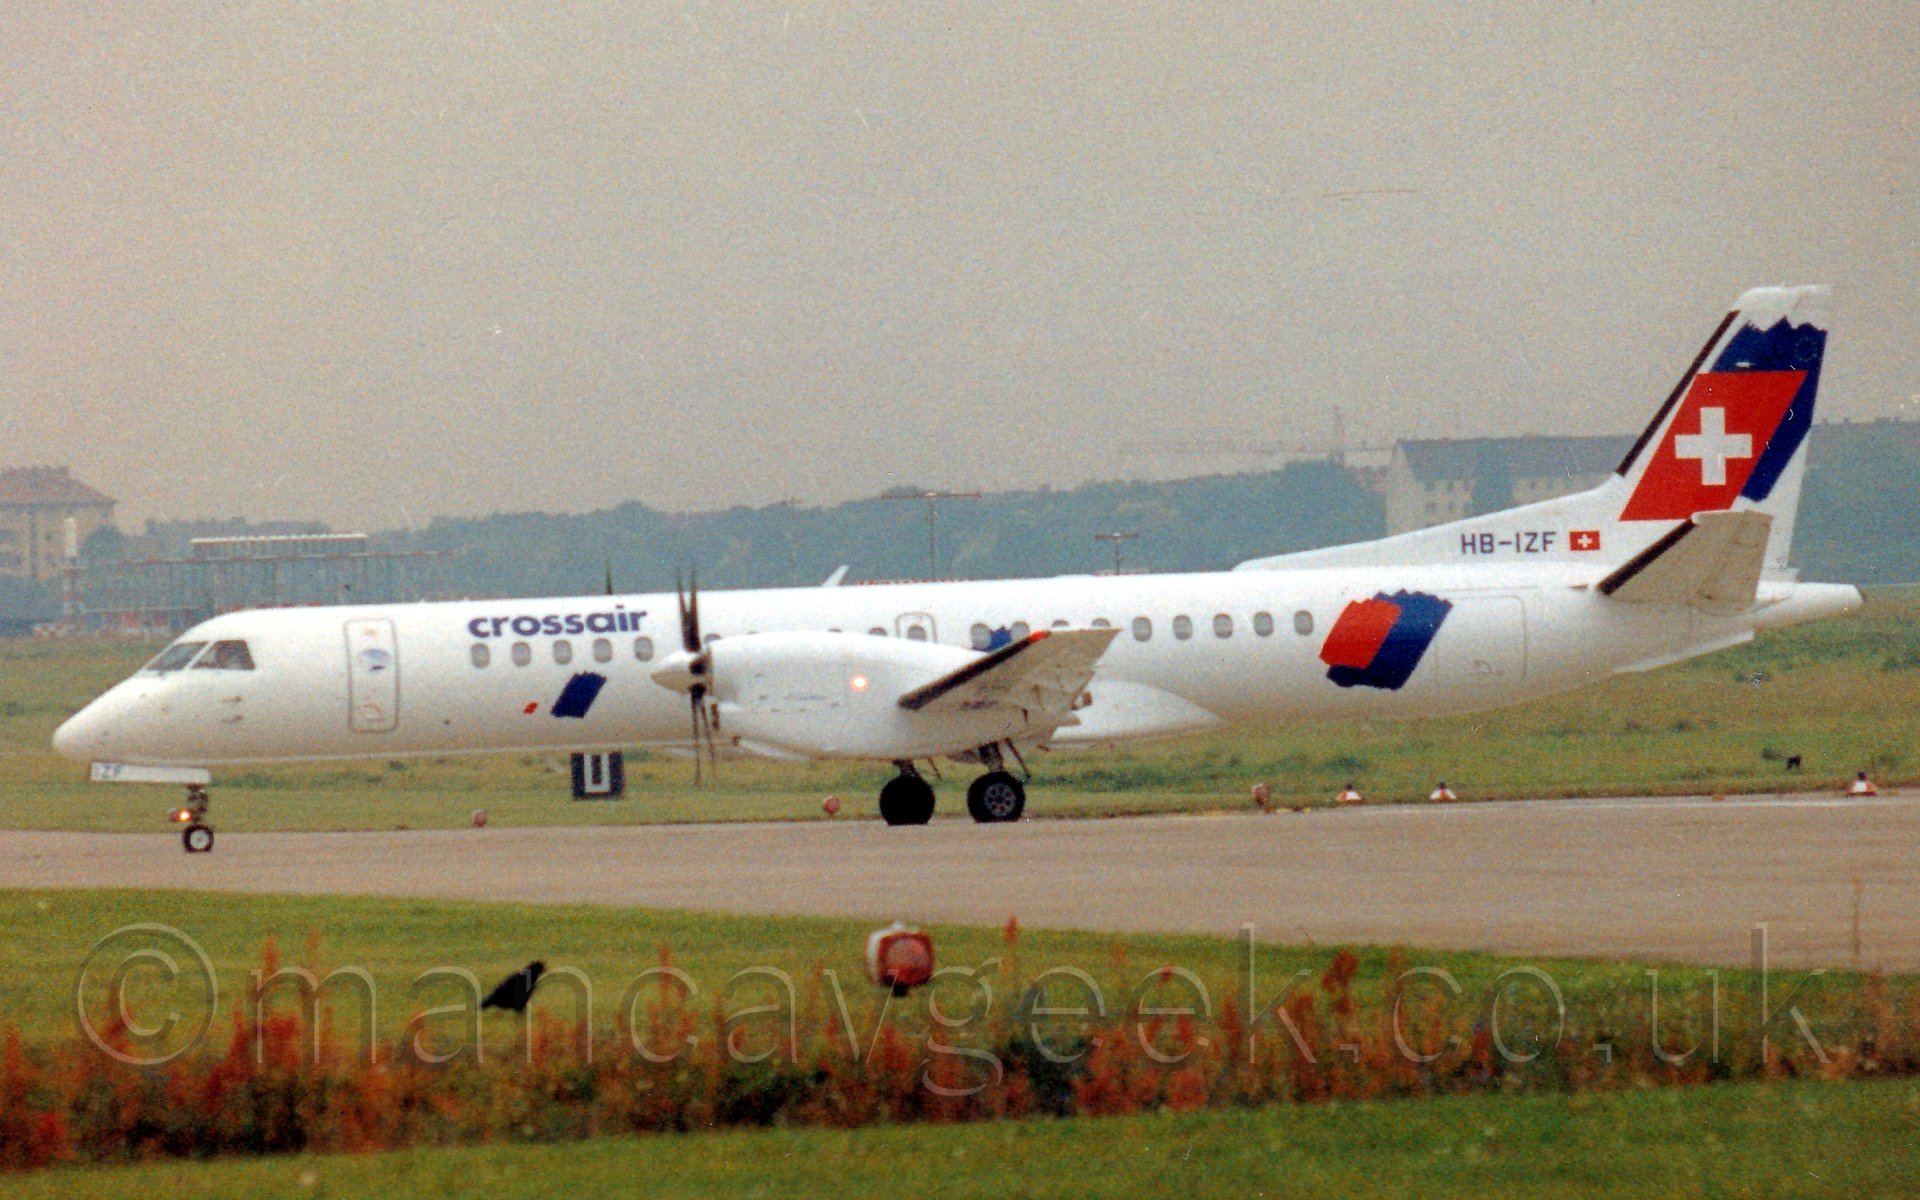 Side view of a twin propellor engined airliner taxiing from right to left. The plane is mostly white, with blue "crossair" titles on the forward fuselage, with red and blue splodges on the rear fuselage. The same splodges are on the tail, the red one being squared off and having a white cross in the middle. The foreground has a large grassed area, with a line of flowering plants, while the background has more grassed areas leding up to tall buildings and trees in the hazy distance. The sky is a hazy grey.